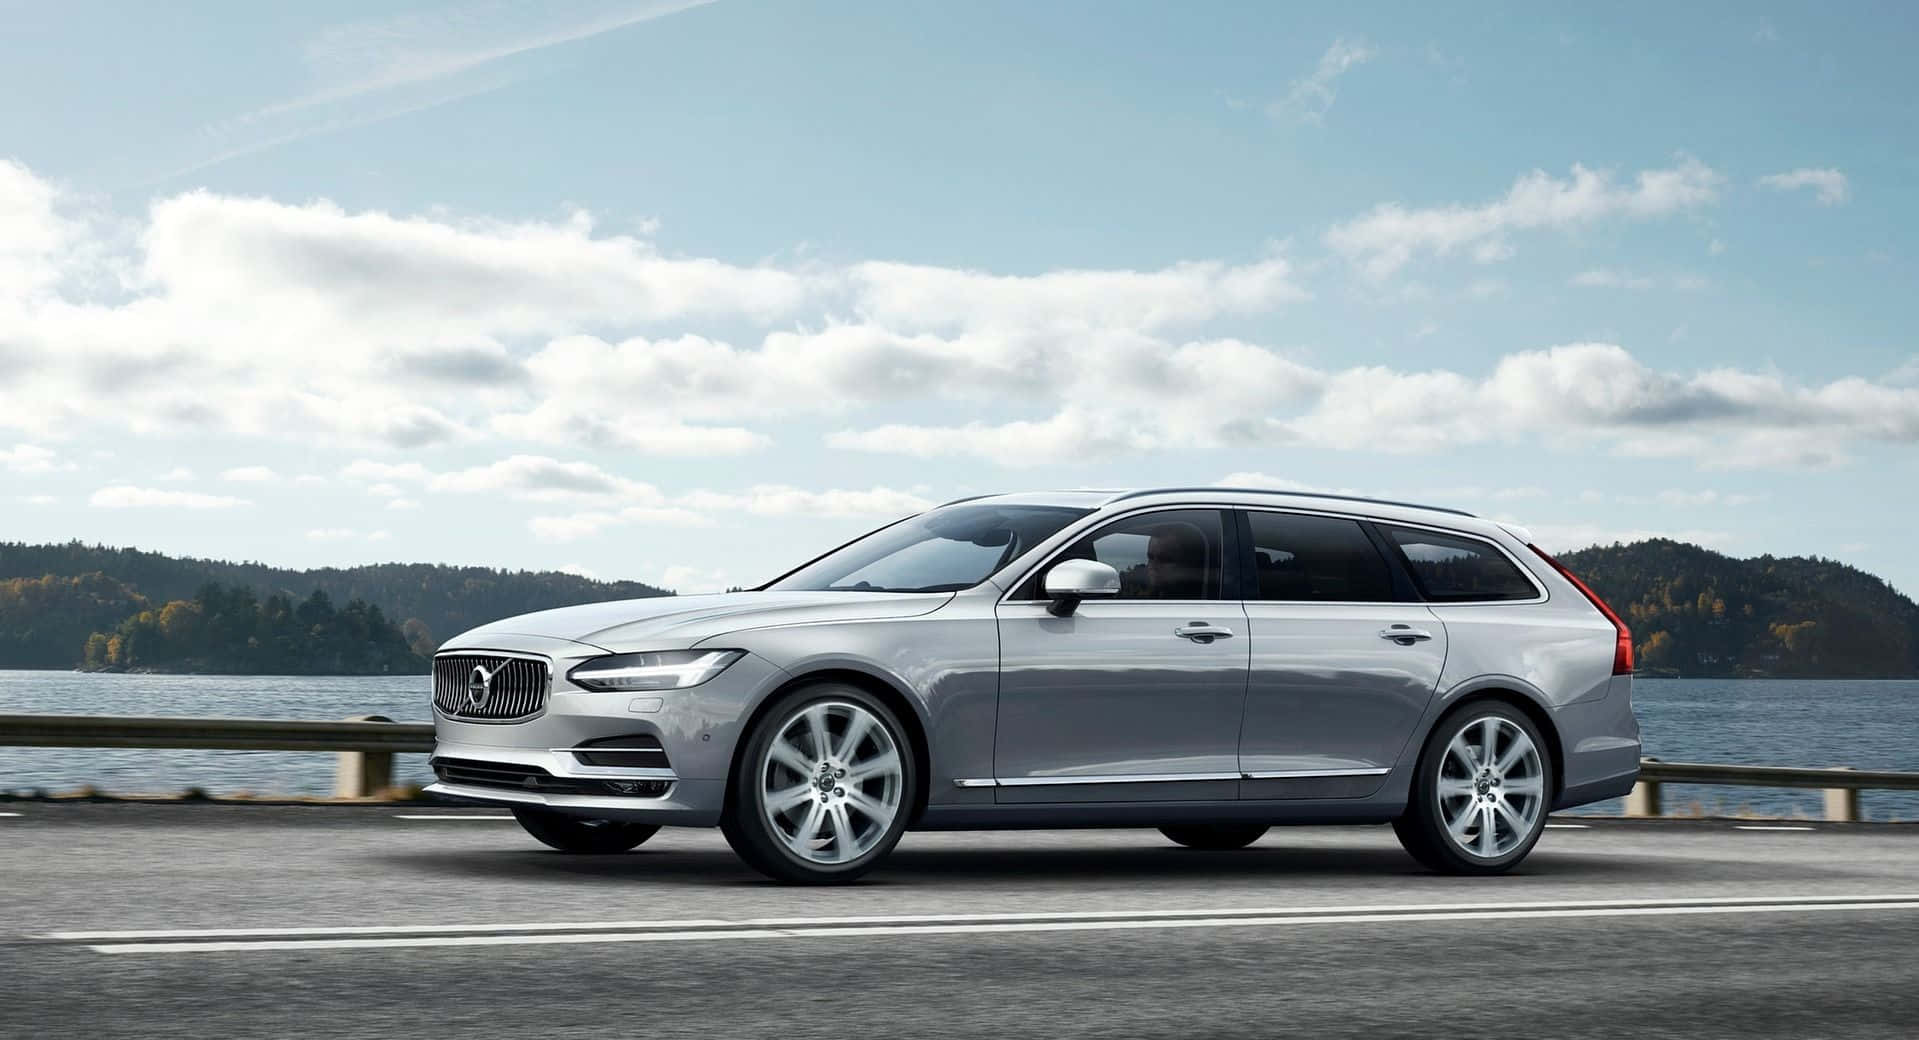 The Luxurious Volvo V90 Basking In Nature Wallpaper